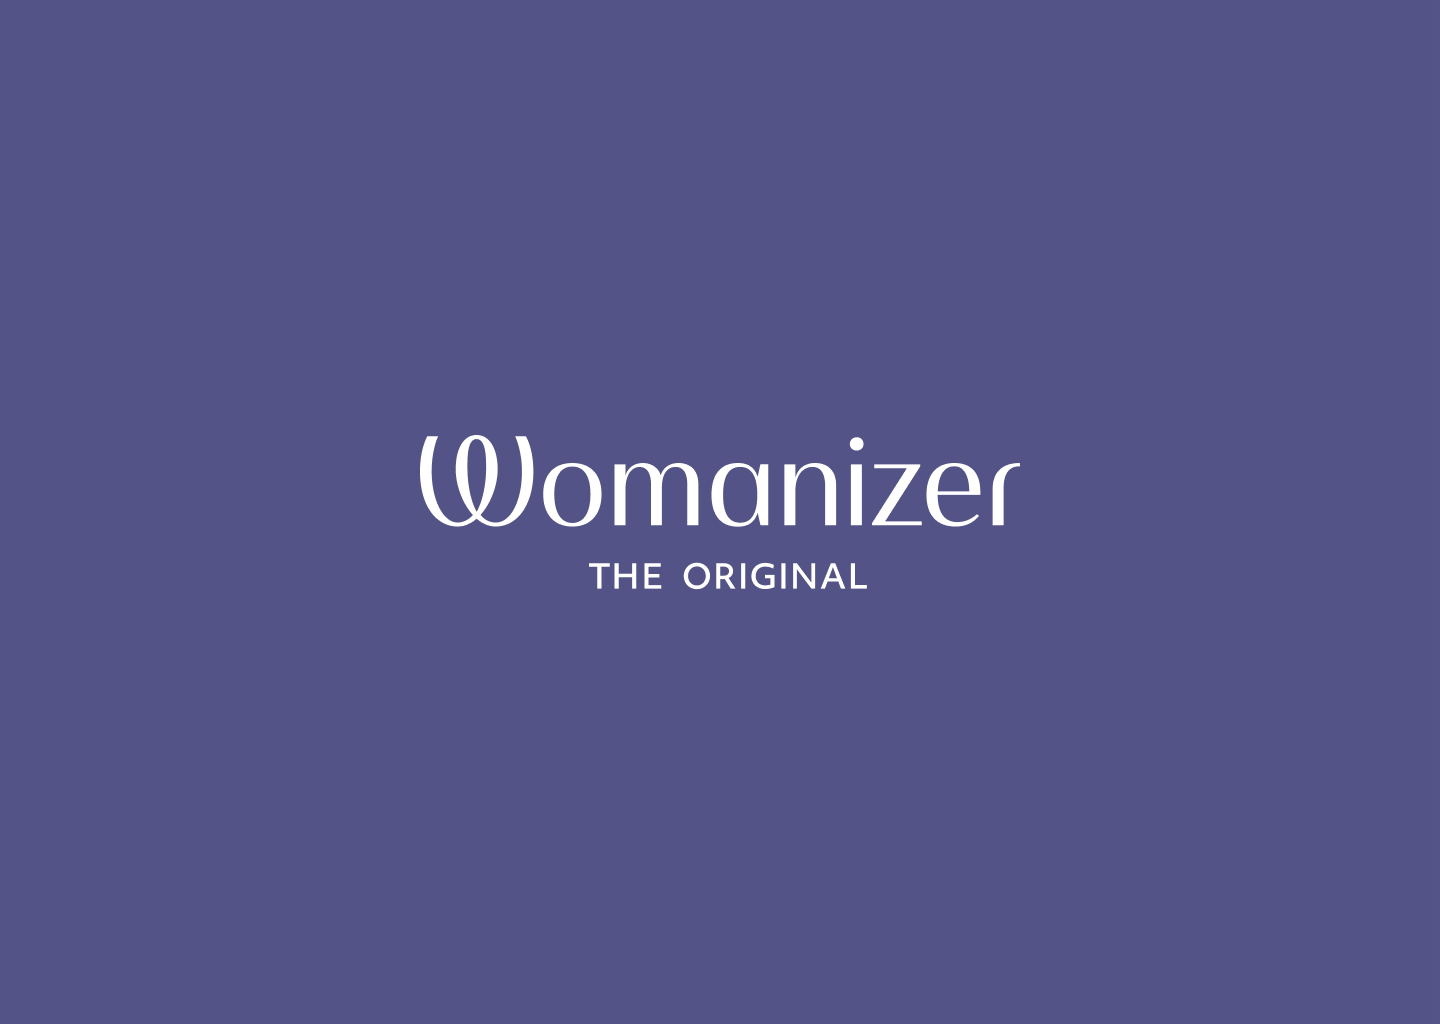 Pleasure Unboxed: Redefining Self-Love with Womanizer OG Packaging by OCIO